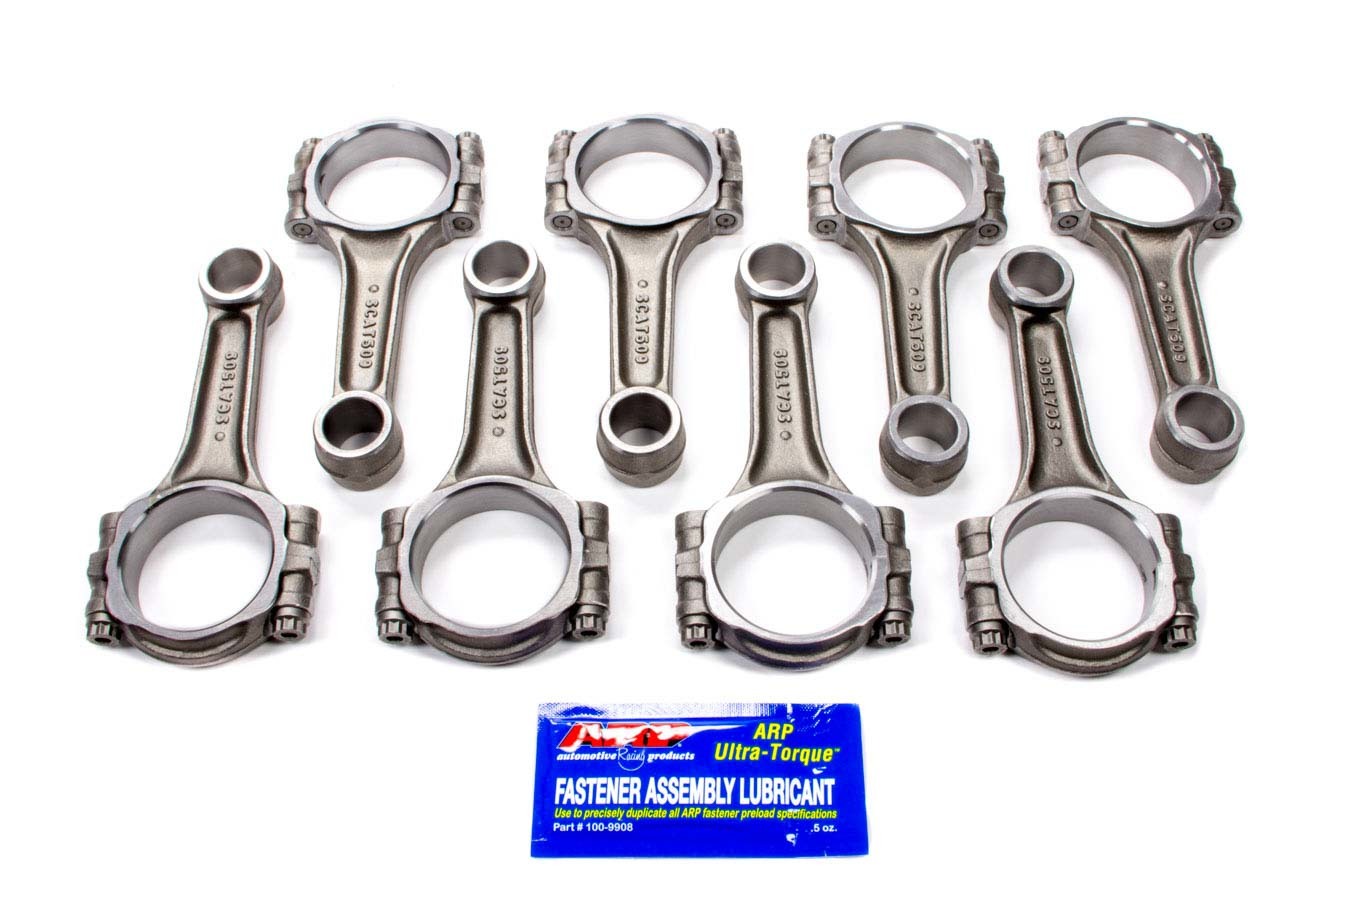 Scat 2-ICR5090P - Connecting Rod, Pro Stock, I Beam, 5.090 in Long, Press Fit, 3/8 in Cap Screws, ARP8740, Forged Steel, Small Block Ford, Set of 8